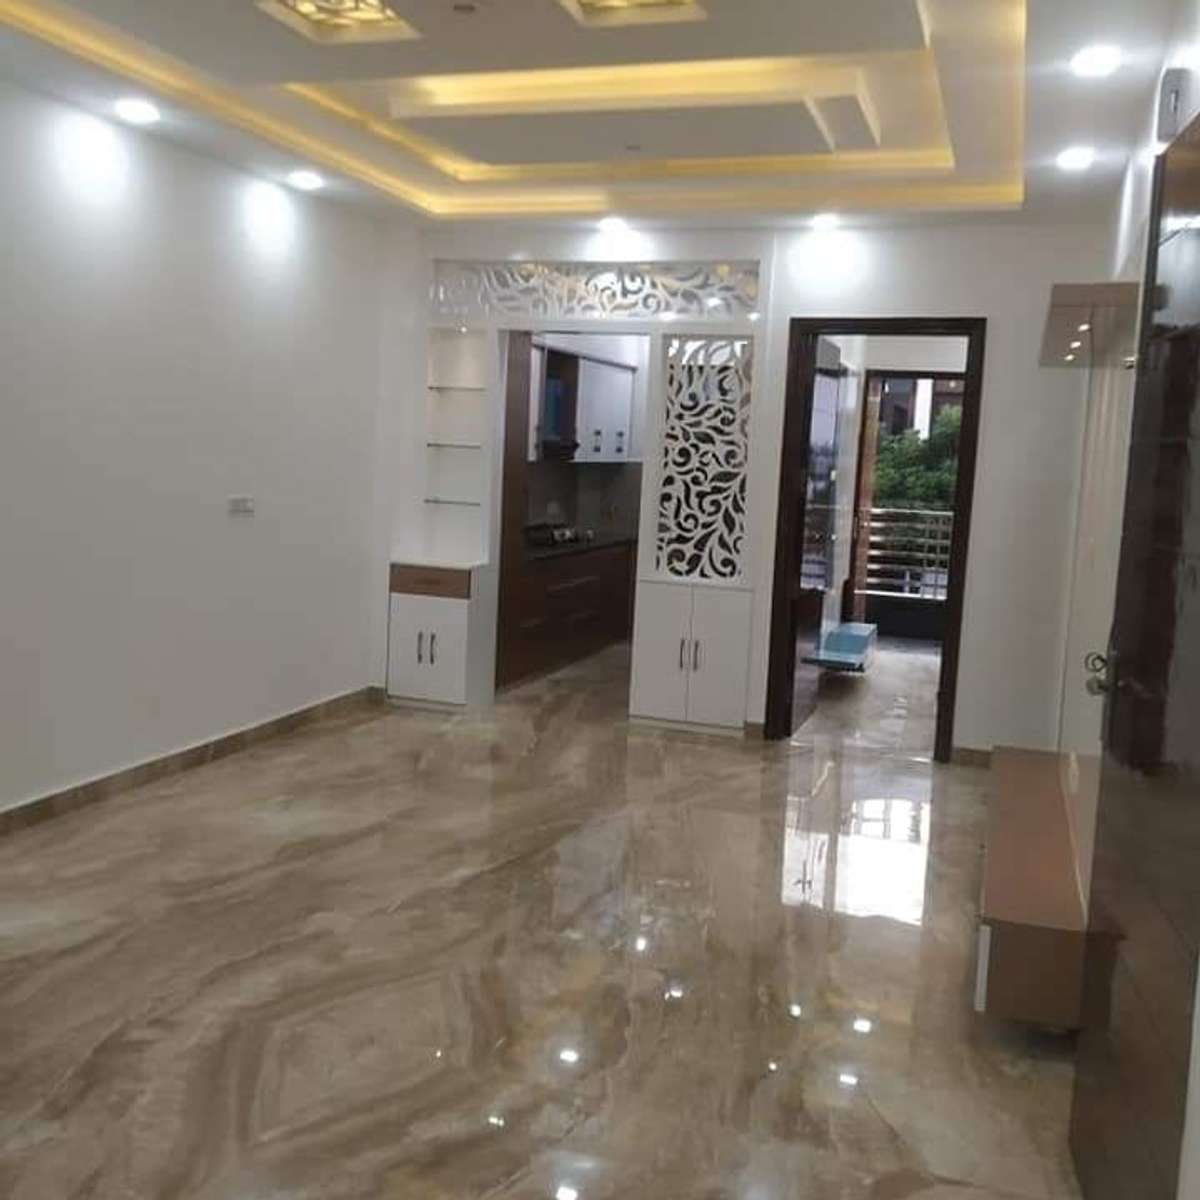 Hello, We are the bigest dealers in Tiles , italian marble,Quality stones and quartz for all kinds of projects.All Types of Tiles in like .
 ðŸ‘‰Ceramic tiles, 
ðŸ‘‰porcelain tiles, 
ðŸ‘‰wall tiles,
ðŸ‘‰Nano tiles 
ðŸ‘‰Double Charge Tiles,
ðŸ‘‰Gvt,Pgvt tiles
ðŸ‘‰ 3D Digital Tiles
ðŸ‘‰ Full Body
ðŸ‘‰ Vitrified Parking Tiles,               
   If you have  any Requirement .pls contact me.

Thank You.
Contact:-9650198412 
 #Italian Marble 
 #imported marble